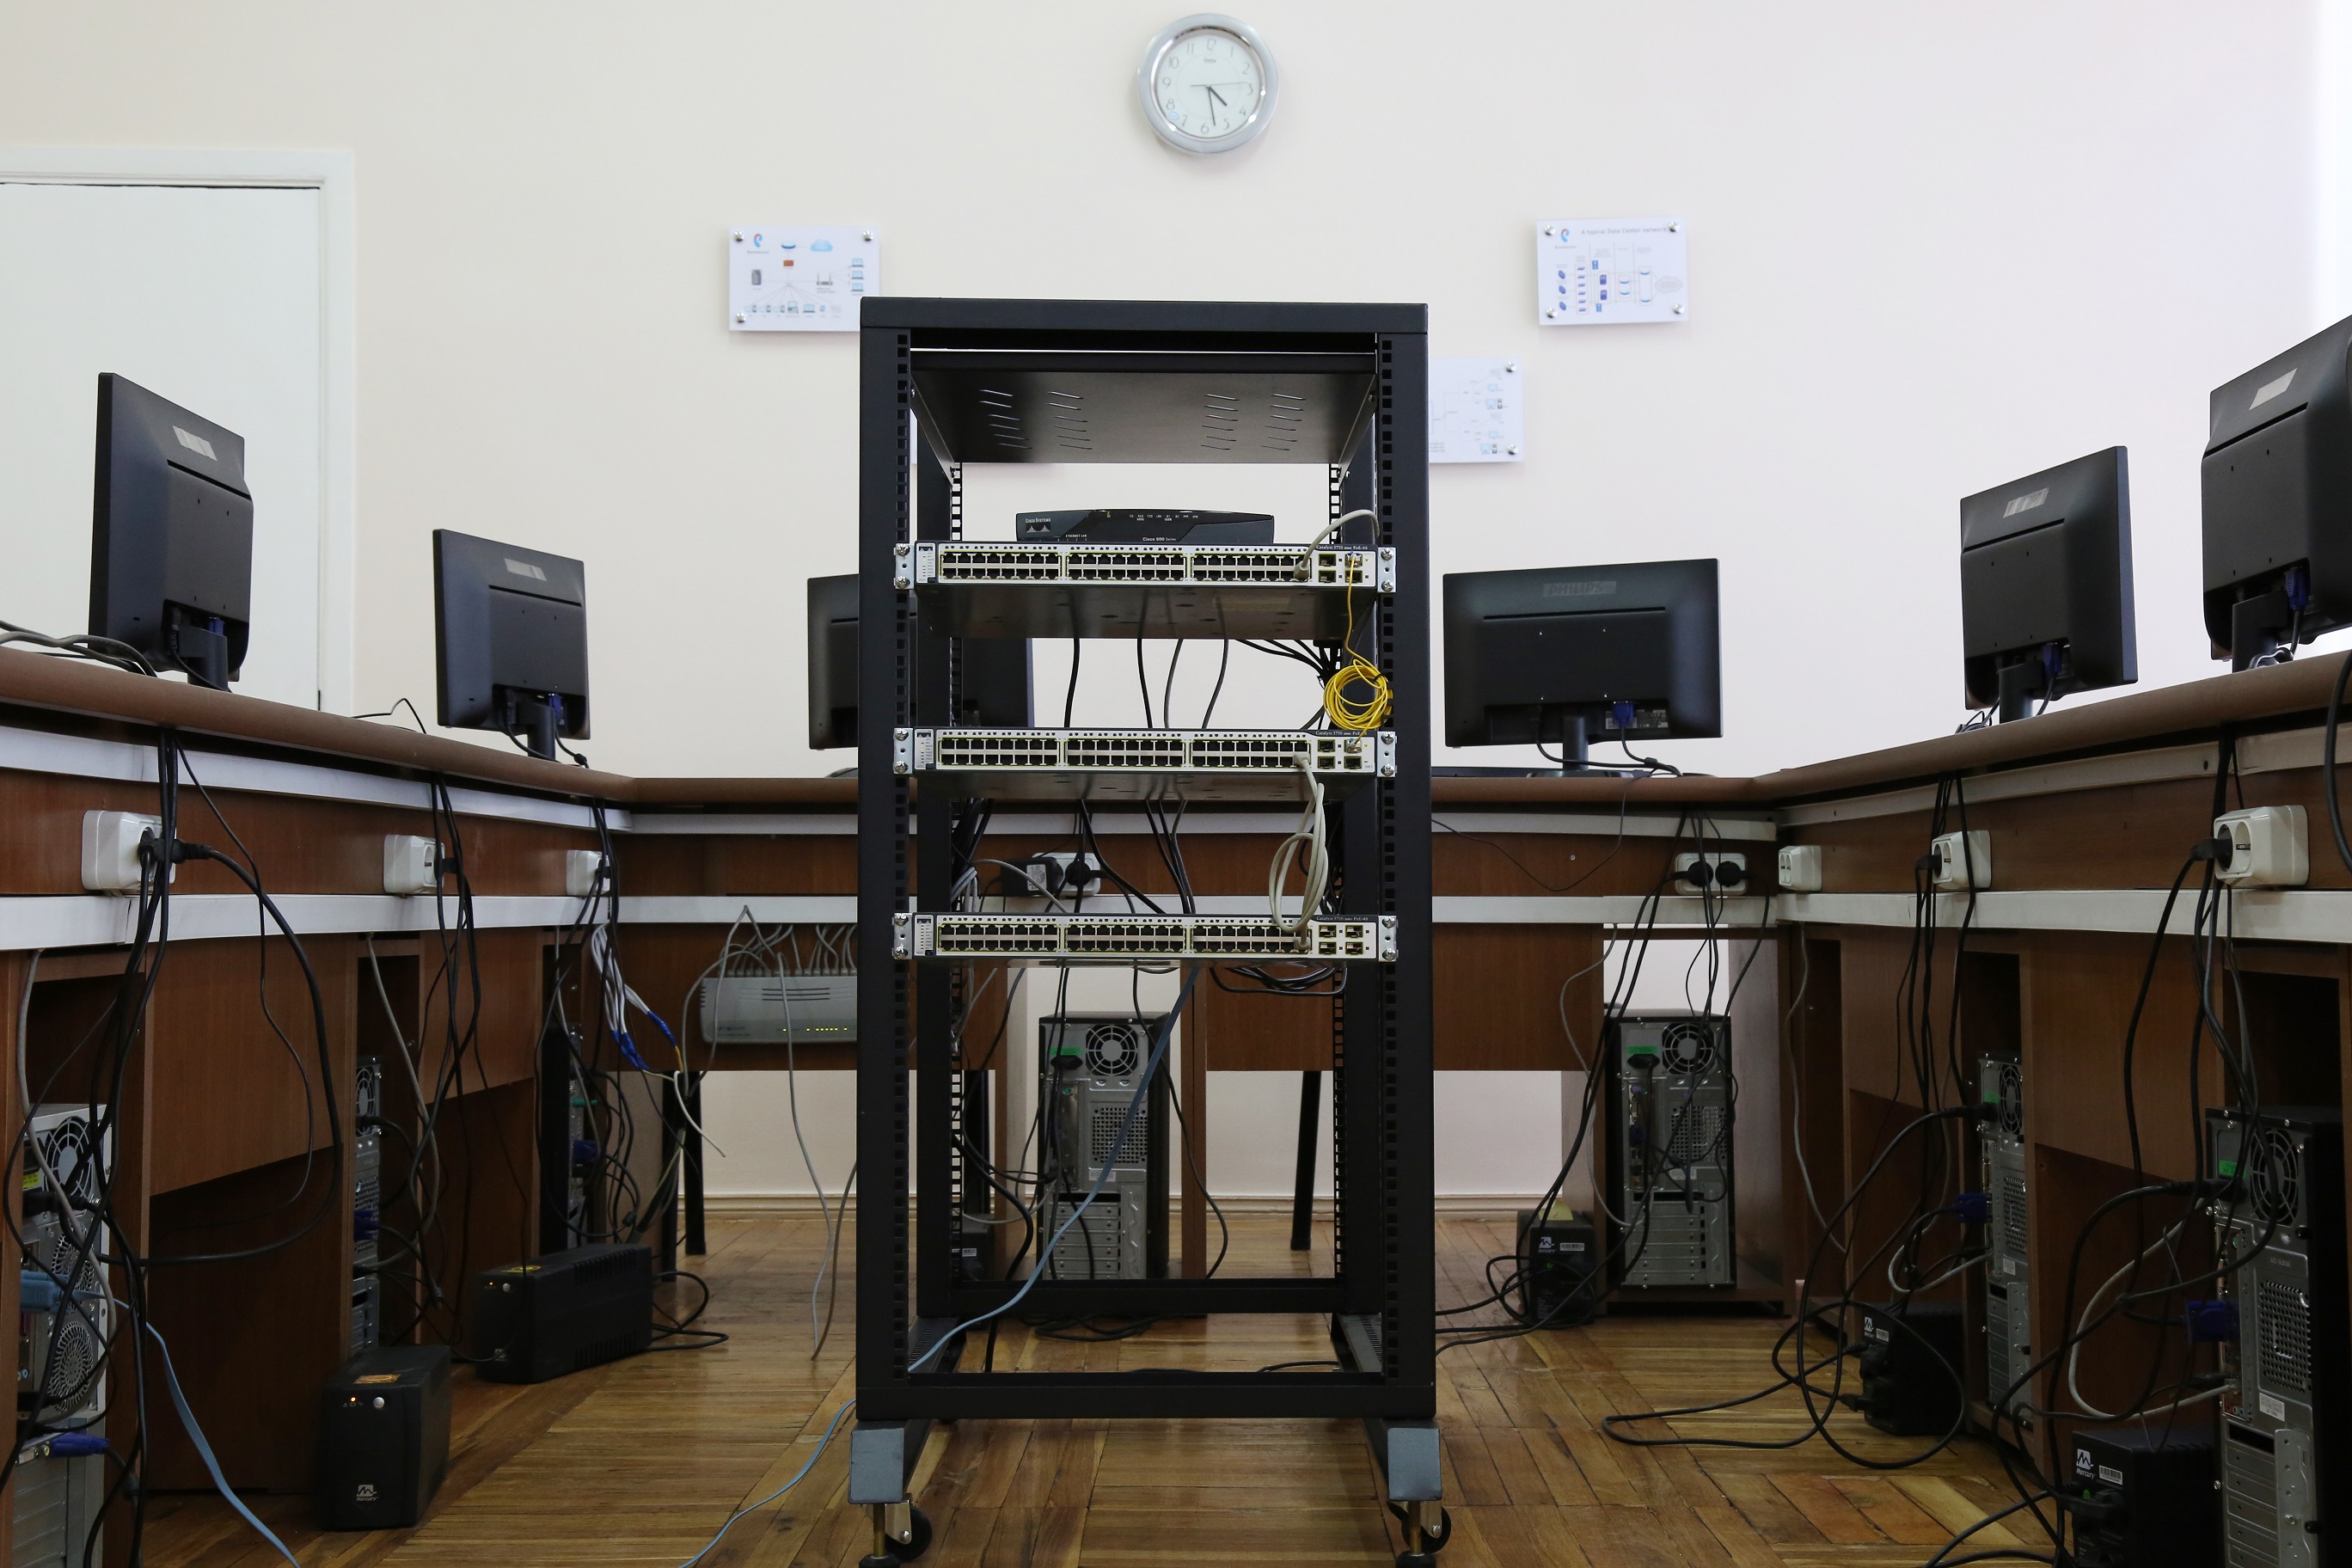 The new, renovated computer classroom opened its doors to students in the National Polytechnic University of Armenia in September.